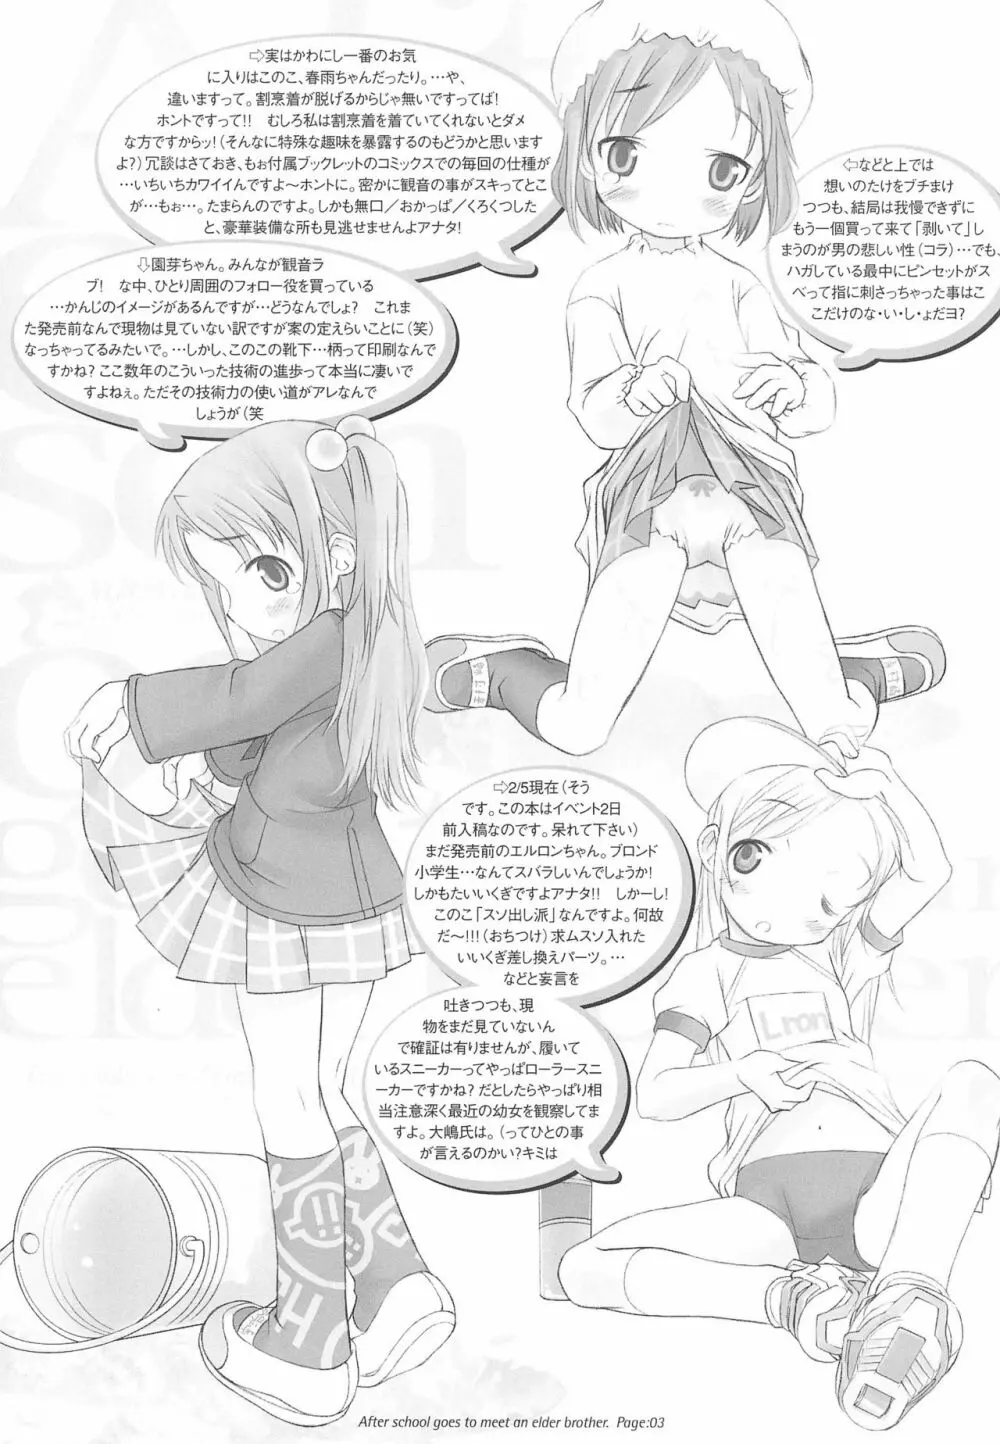 After School Goes To Meet An Elder Brother 放課後はお兄ちゃんに逢いに行きます。 Page.3